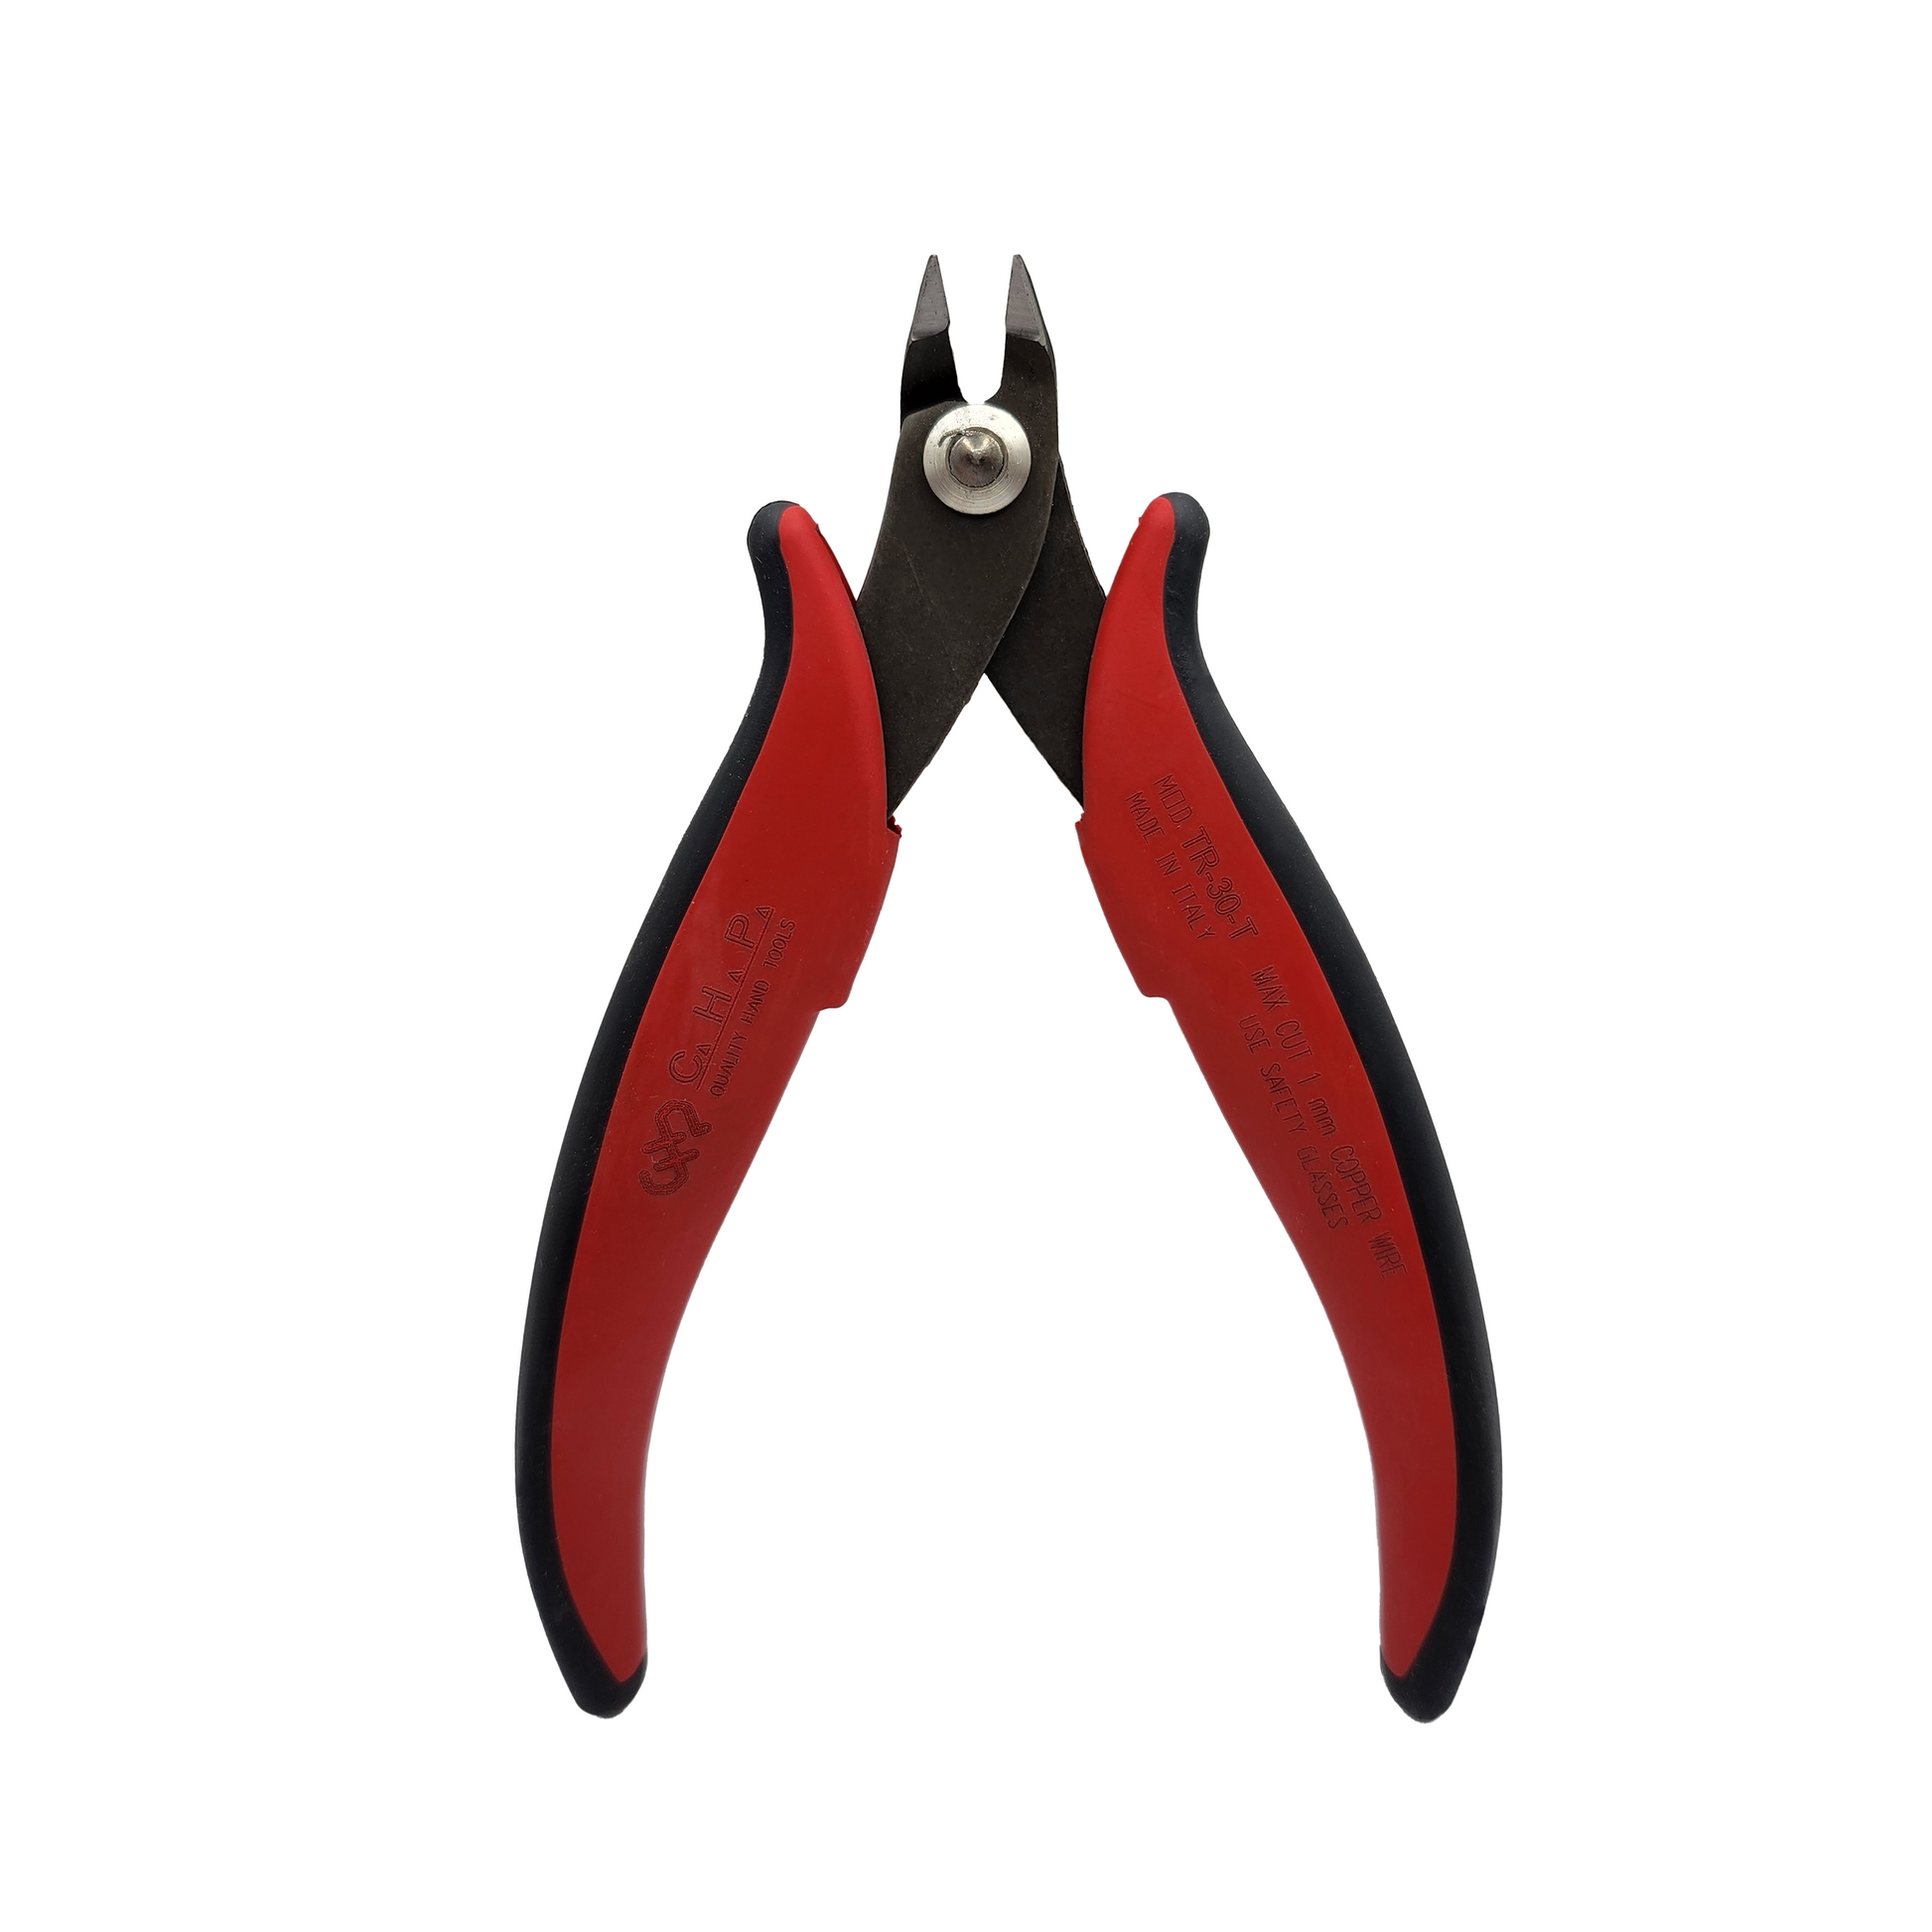 CHP_ CHP TR-30-T Cutter_ Cutters, Pliers, Multi-Tools_ Hakko Products